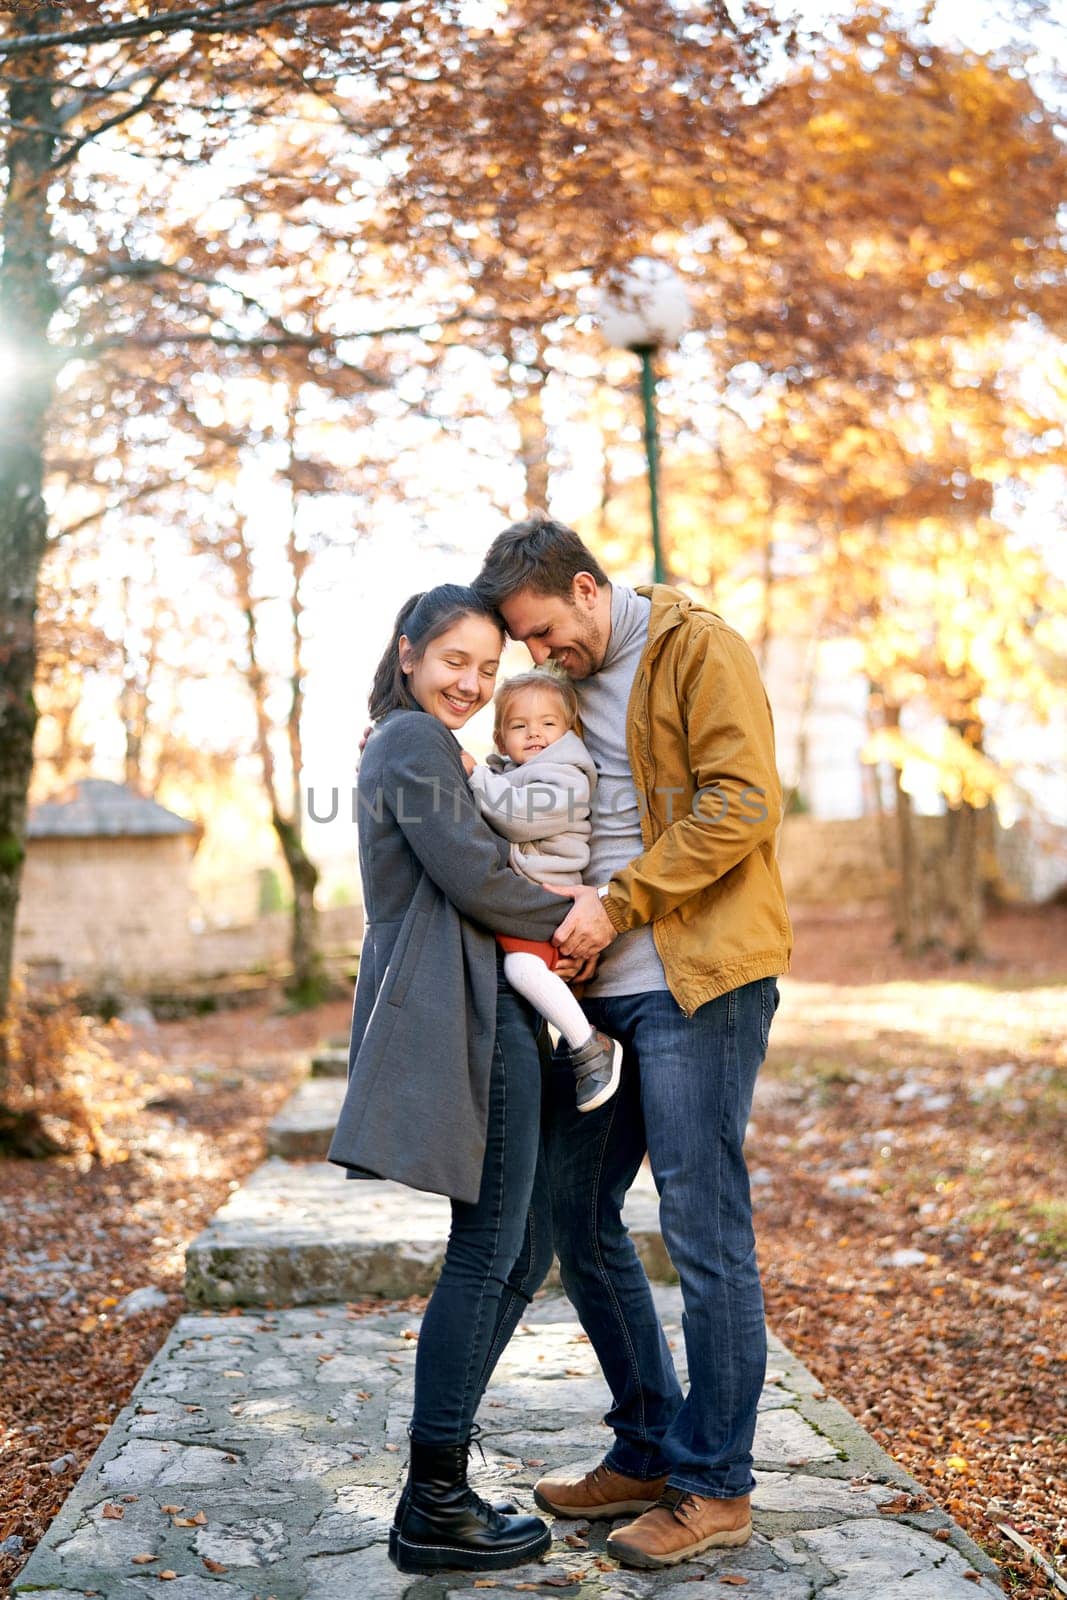 Smiling dad and mom touching foreheads while standing with a little girl in her arms in the autumn forest. High quality photo